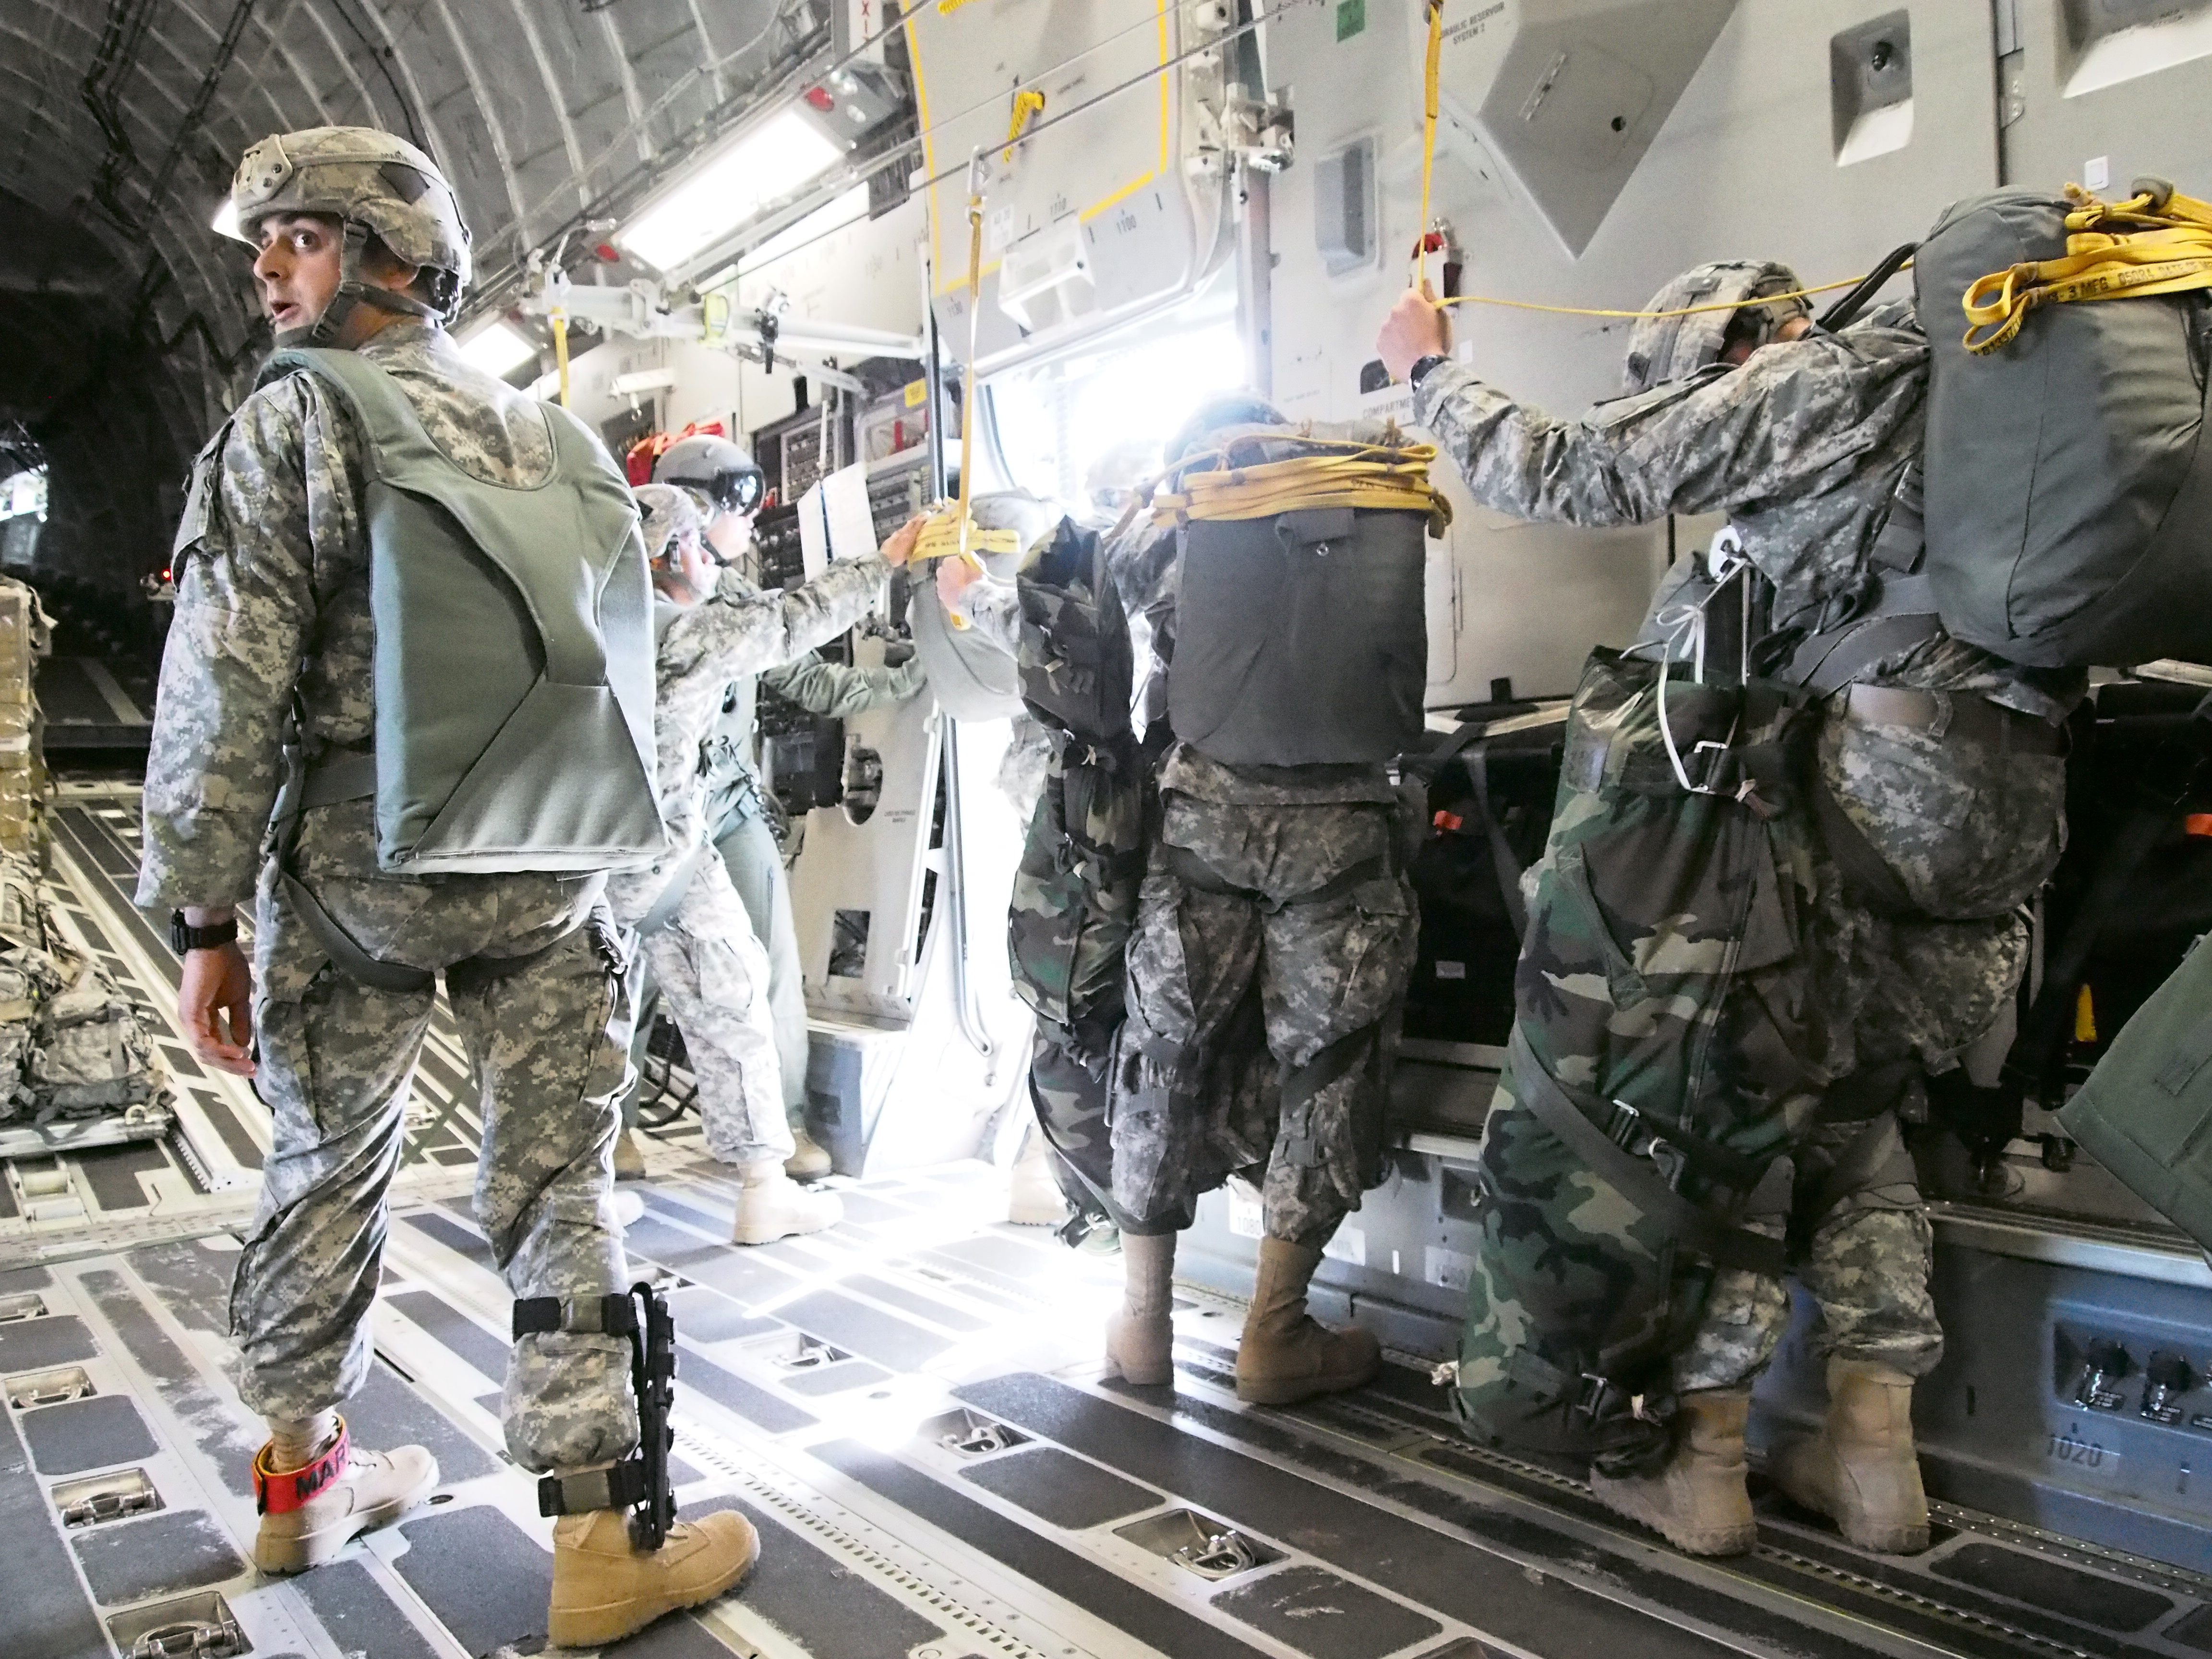 Airborne infantrymen from the 4-25 preparing to jump from a C-17 into Australia during a training mission in July 2015 (Photo by Zachariah Hughes/Alaska Public Media)